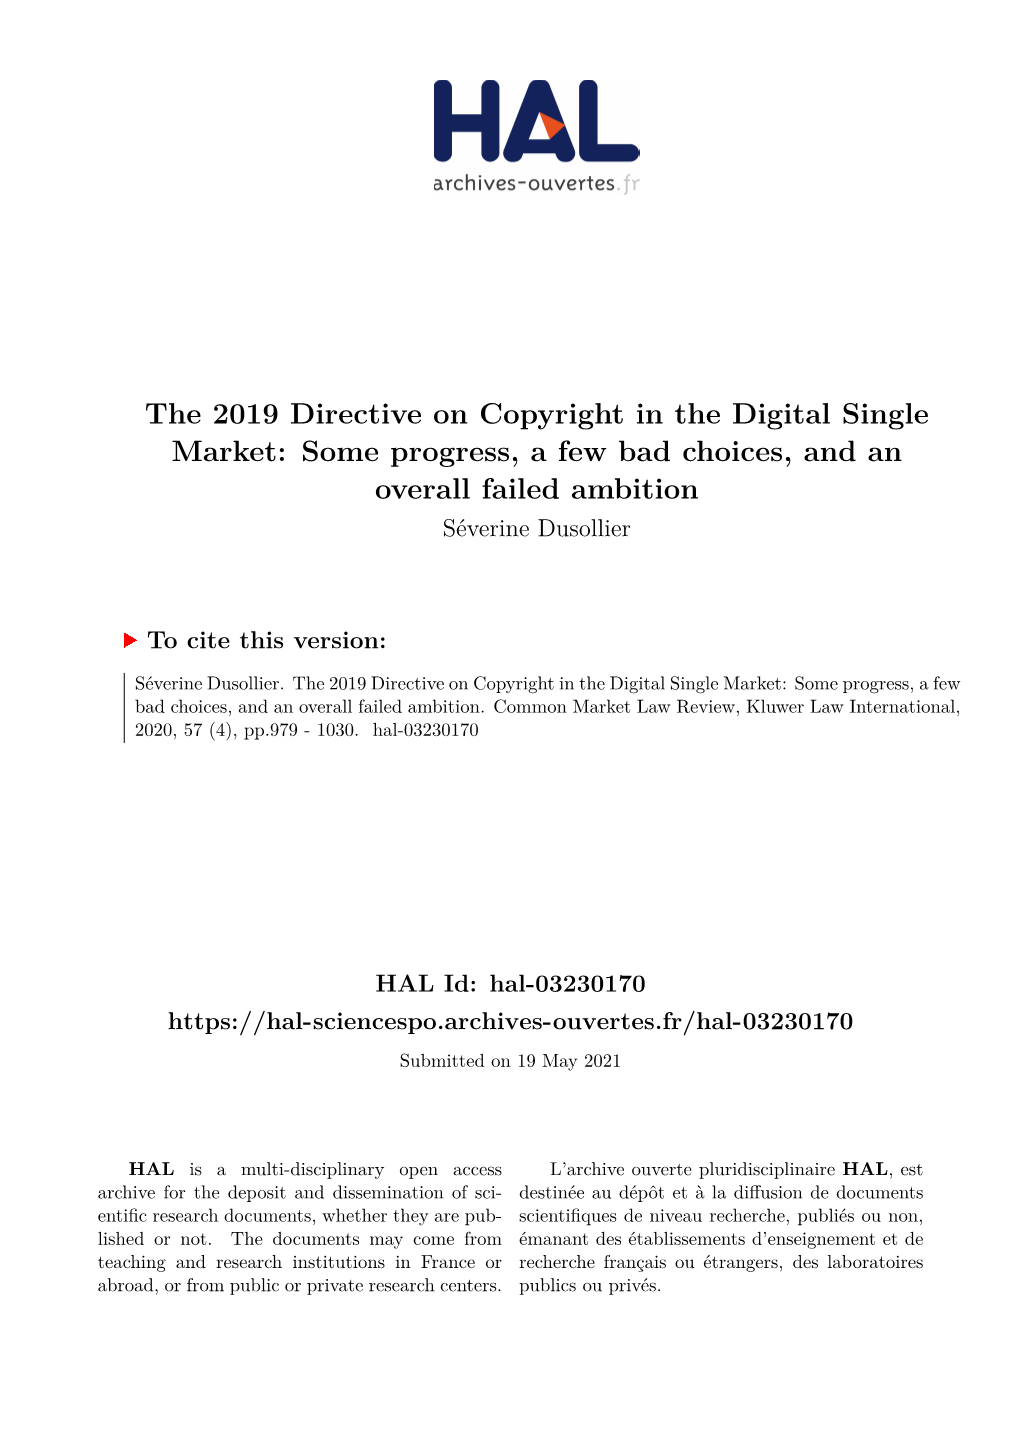 The 2019 Directive on Copyright in the Digital Single Market: Some Progress, a Few Bad Choices, and an Overall Failed Ambition Séverine Dusollier